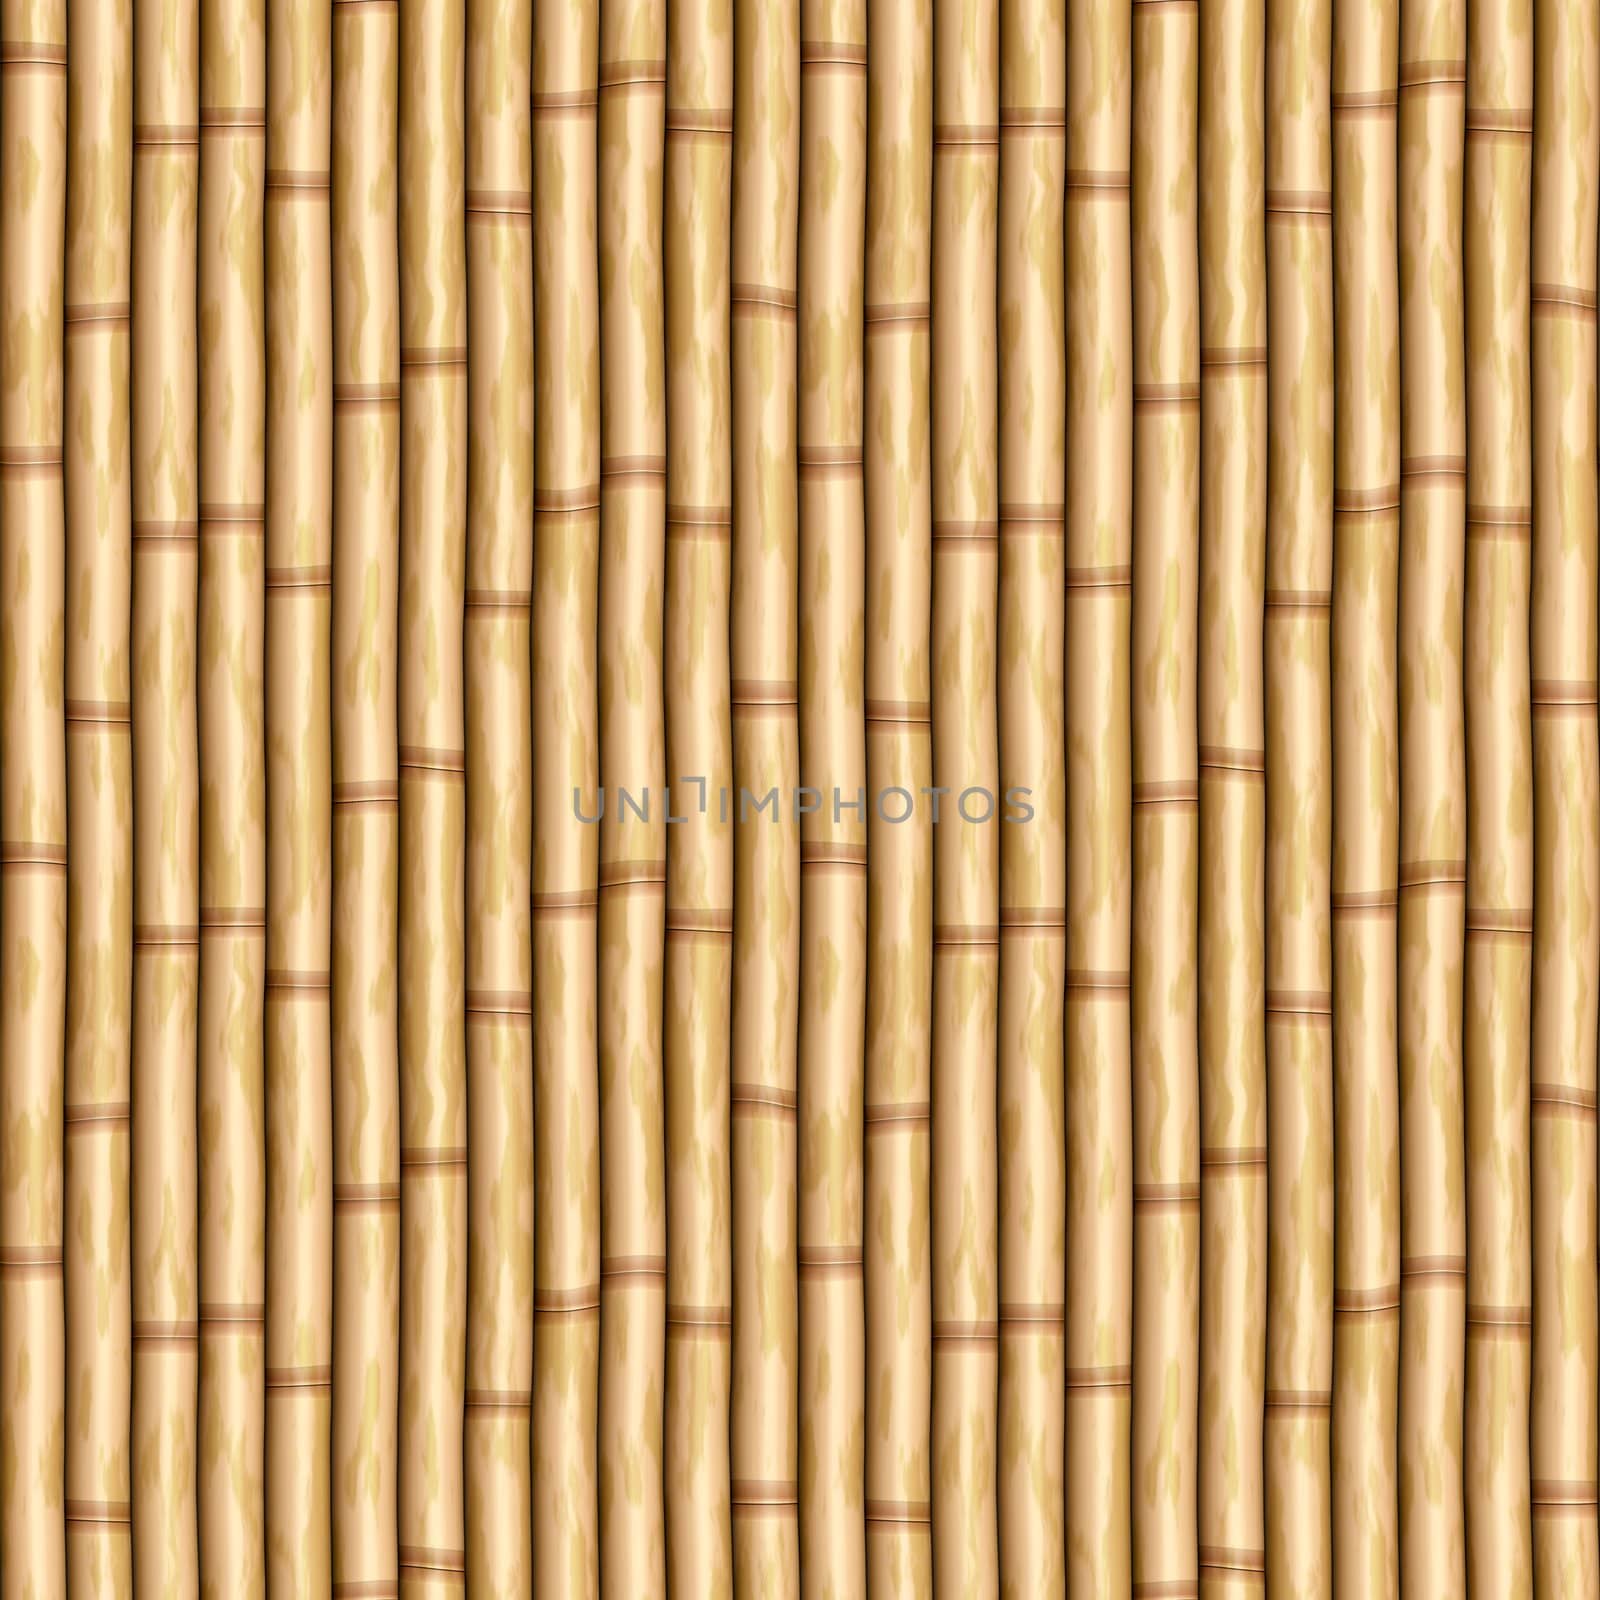 bamboo wall by clearviewstock